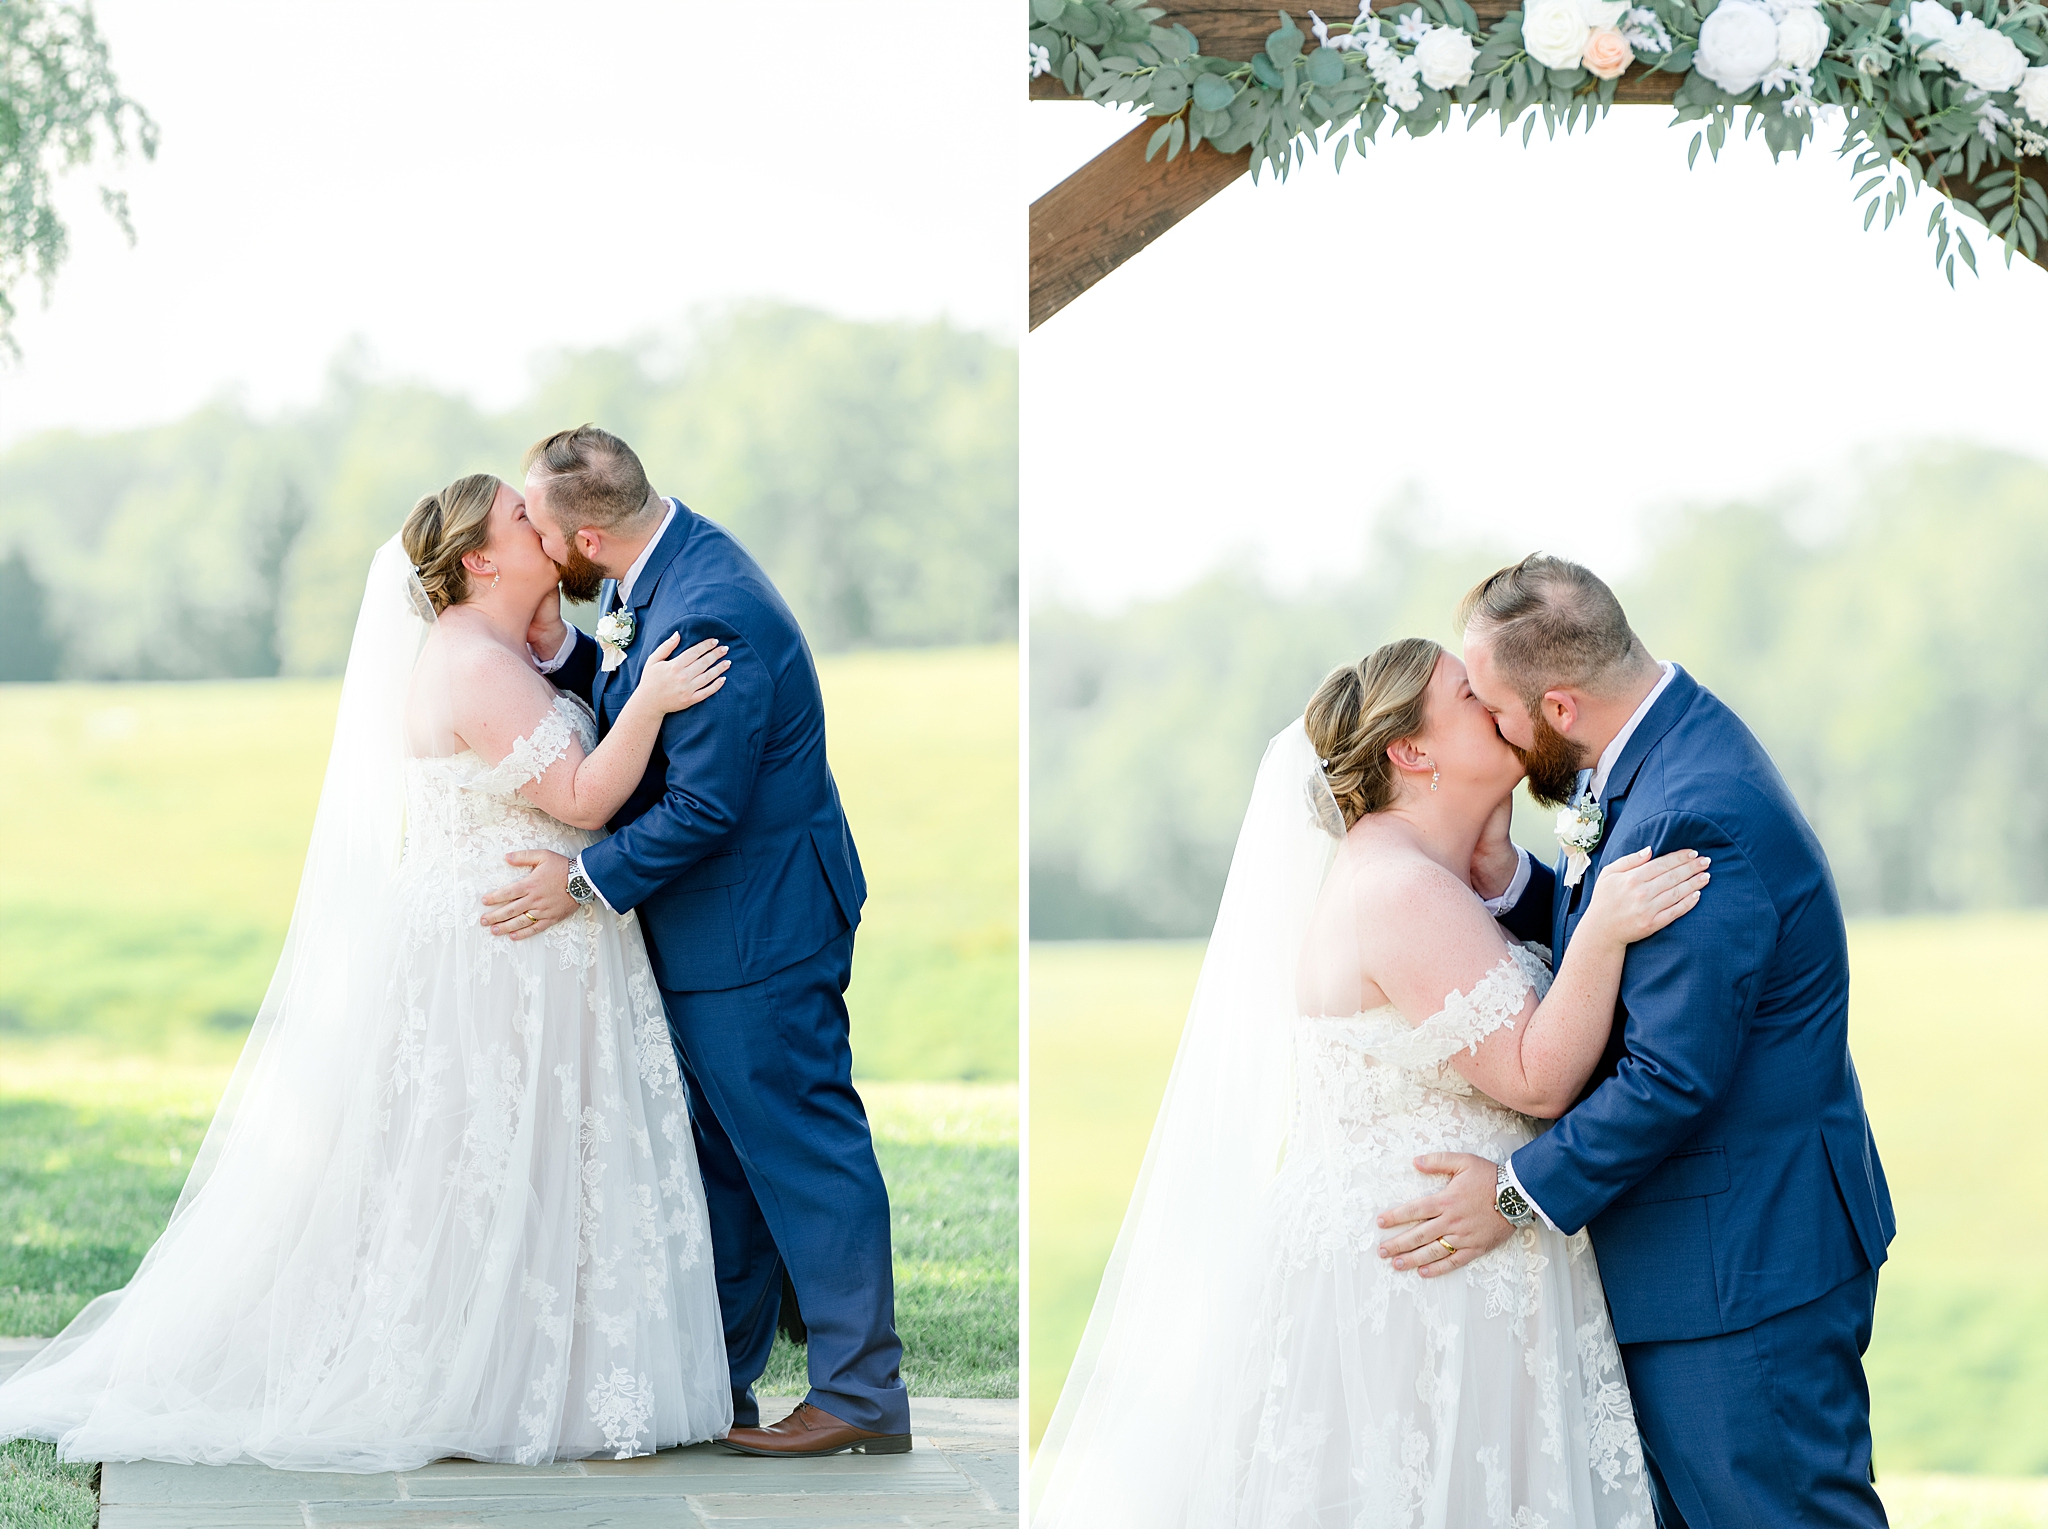 bride and groom's first kiss on wedding day